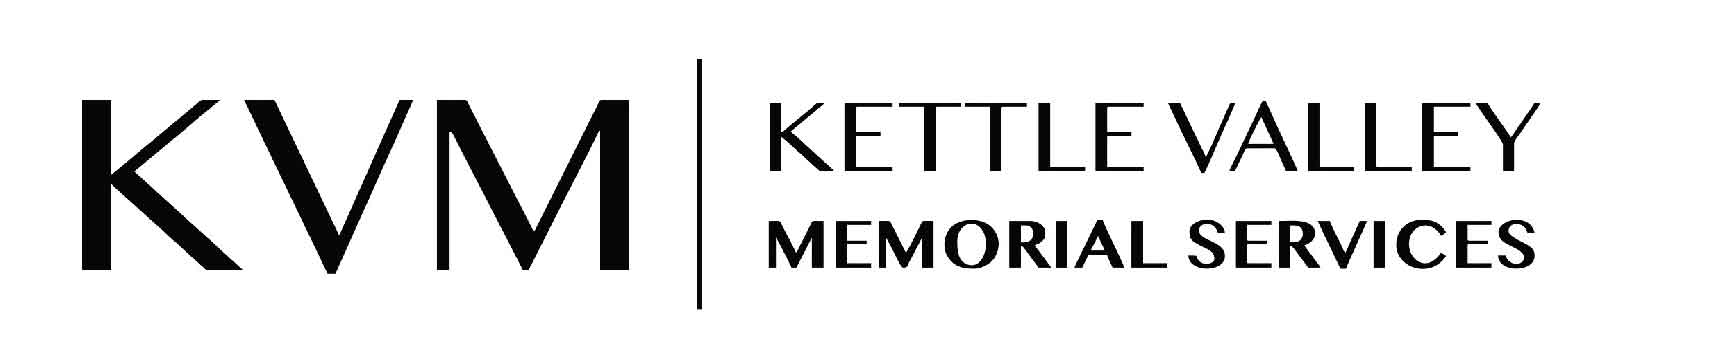 Canada Day Fireworks Sponsor - Kettle Valley Memorial Services